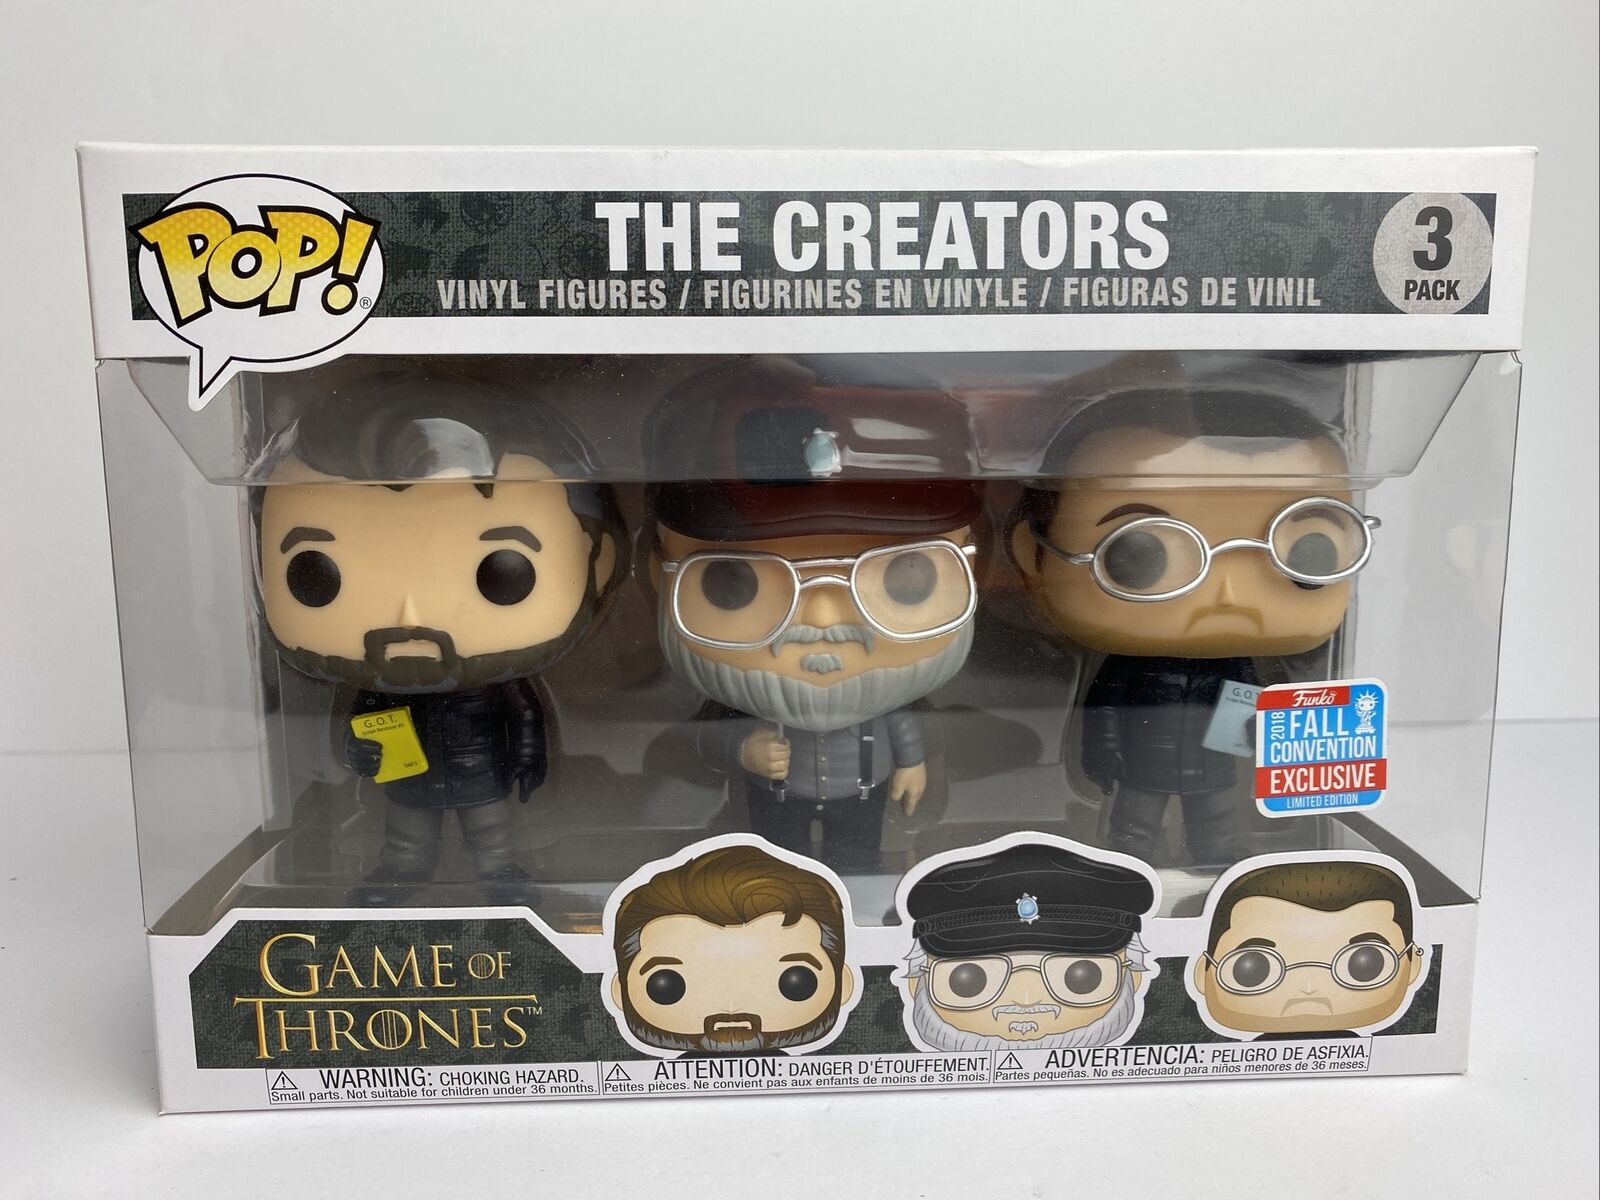 Funko Pop Game of Thrones The Creators 3 Pack 2018 Fall Convention Exclusive